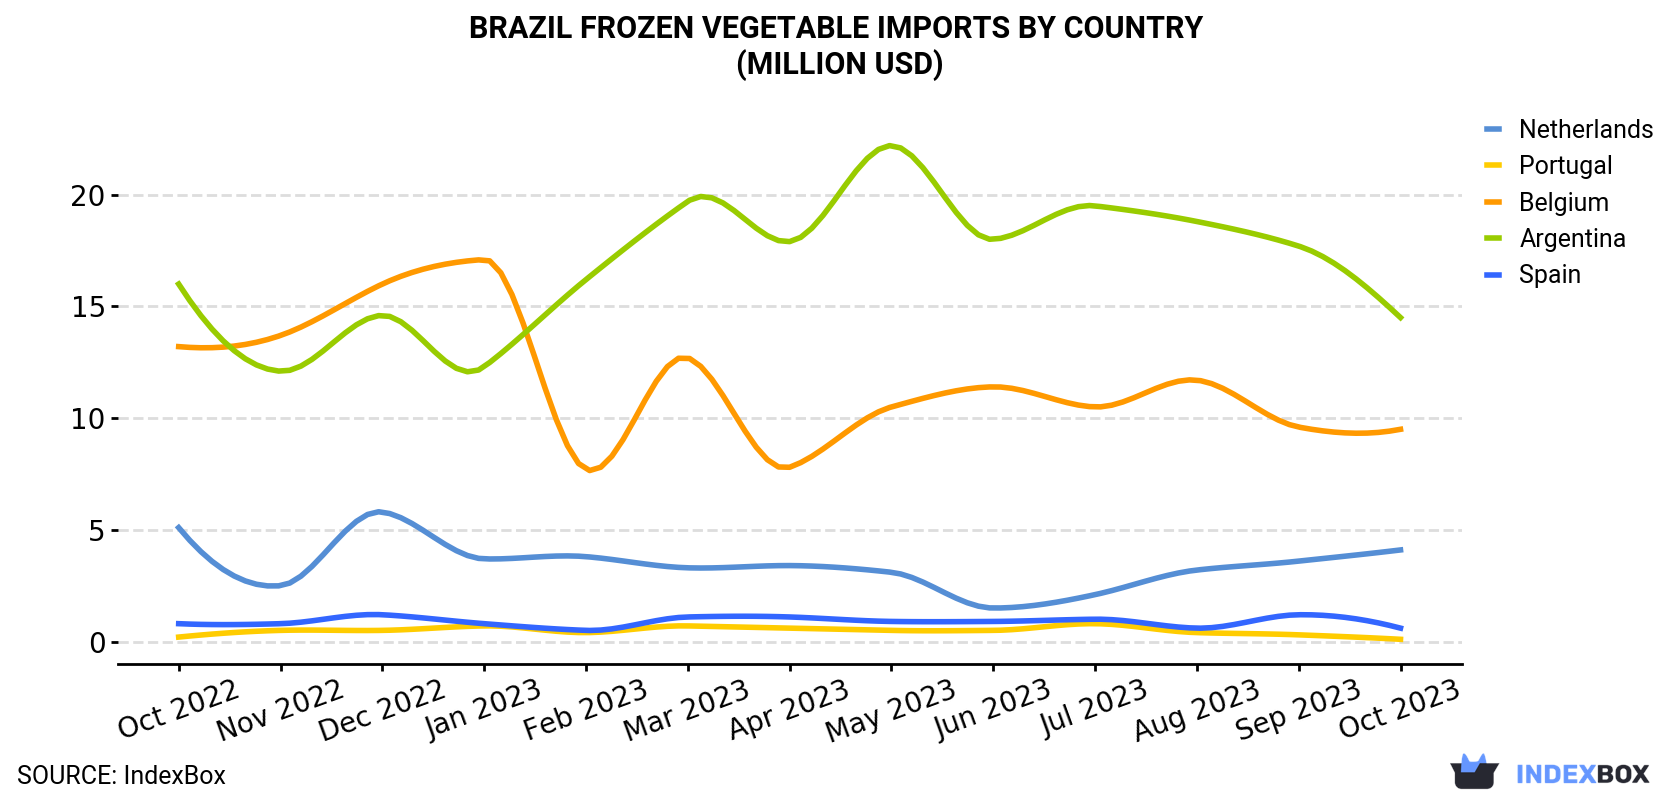 Brazil Frozen Vegetable Imports By Country (Million USD)